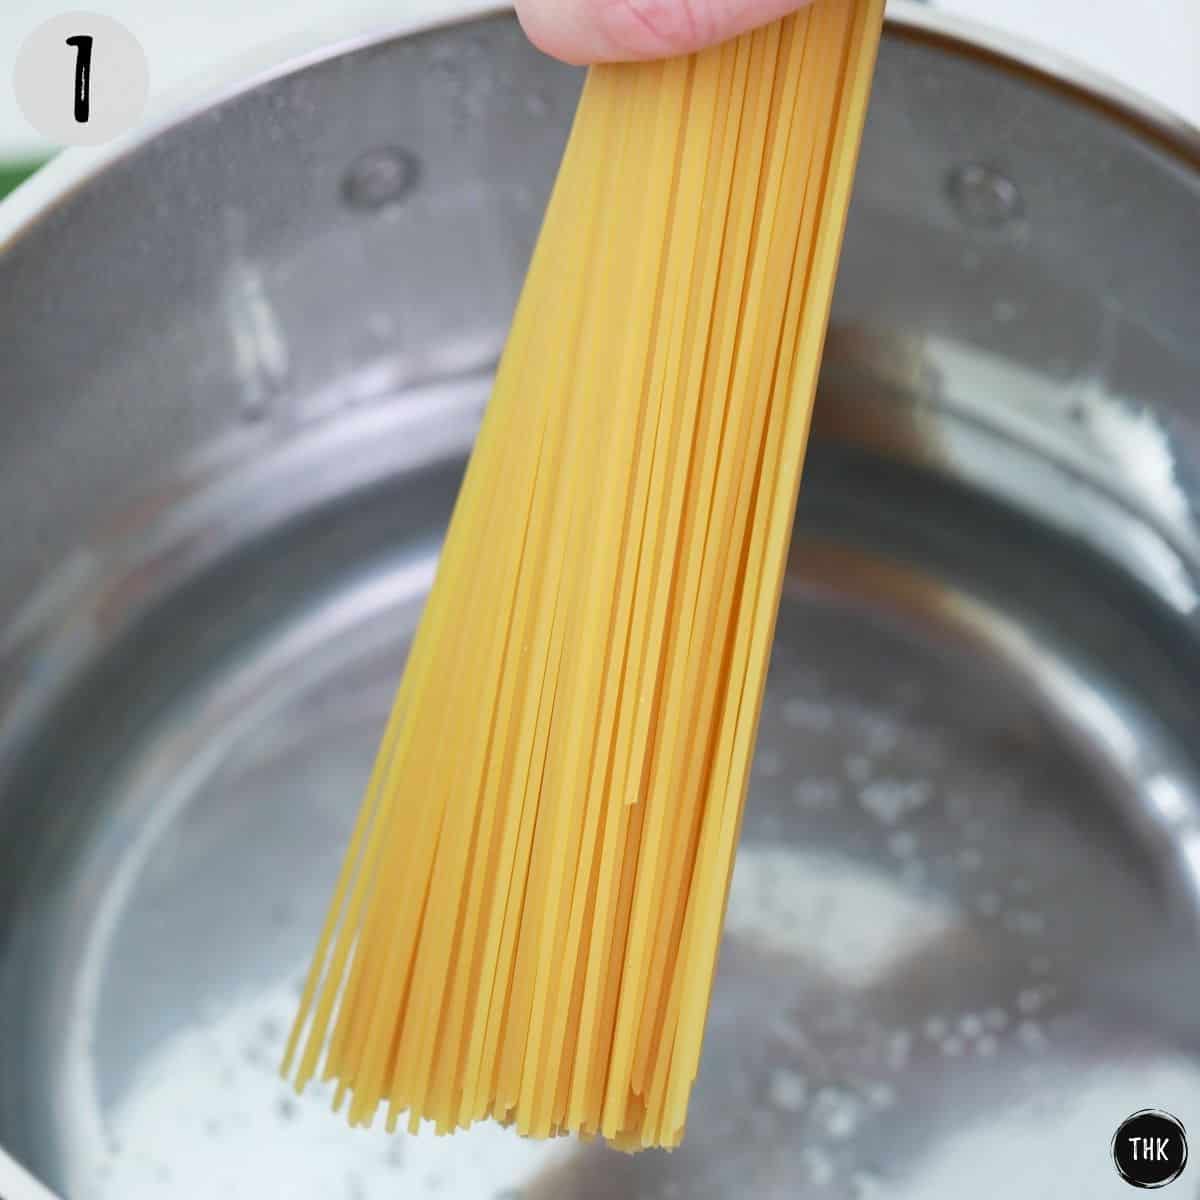 Spaghetti being placed in pot of boiling water.